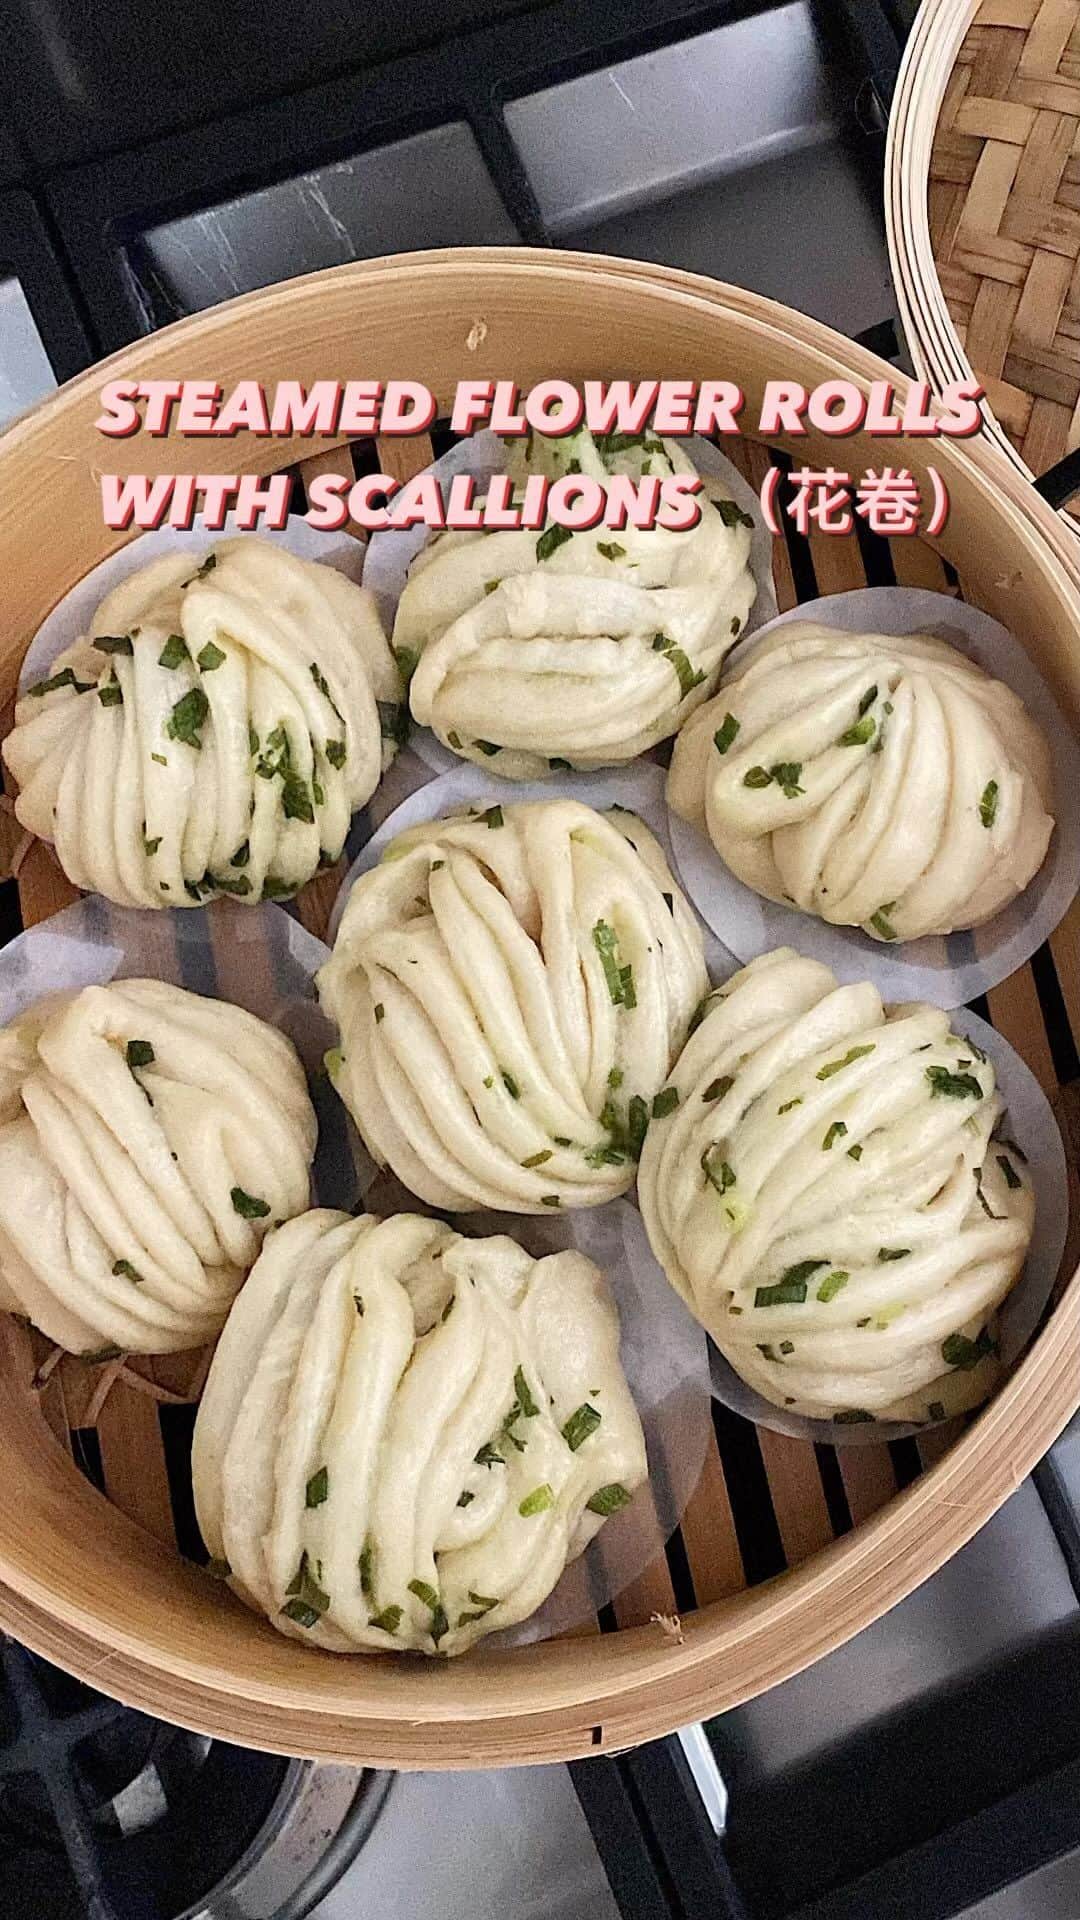 Samantha Leeのインスタグラム：「Steamed Flower Rolls With Scallions (花卷） These steamed flower rolls with scallions - soft, fluffy, and bursting with fragrant scallion flavour. They’re the perfect way to start your day, enjoy as a snack or a side dish for Chinese dishes. Treat yourself to a taste of the Orient and indulge in these irresistible dim sum delights!  #steamedflowerrolls   Dough 300g All purpose flour 3g Yeast 8g Sugar 3g Baking powder 10g Scallion/Veg oil 160ml Water  Fillings 3/4 cup Scallions, finely chopped 1/2 tsp Salt 2 Tbsp Scallion/Veg oil」